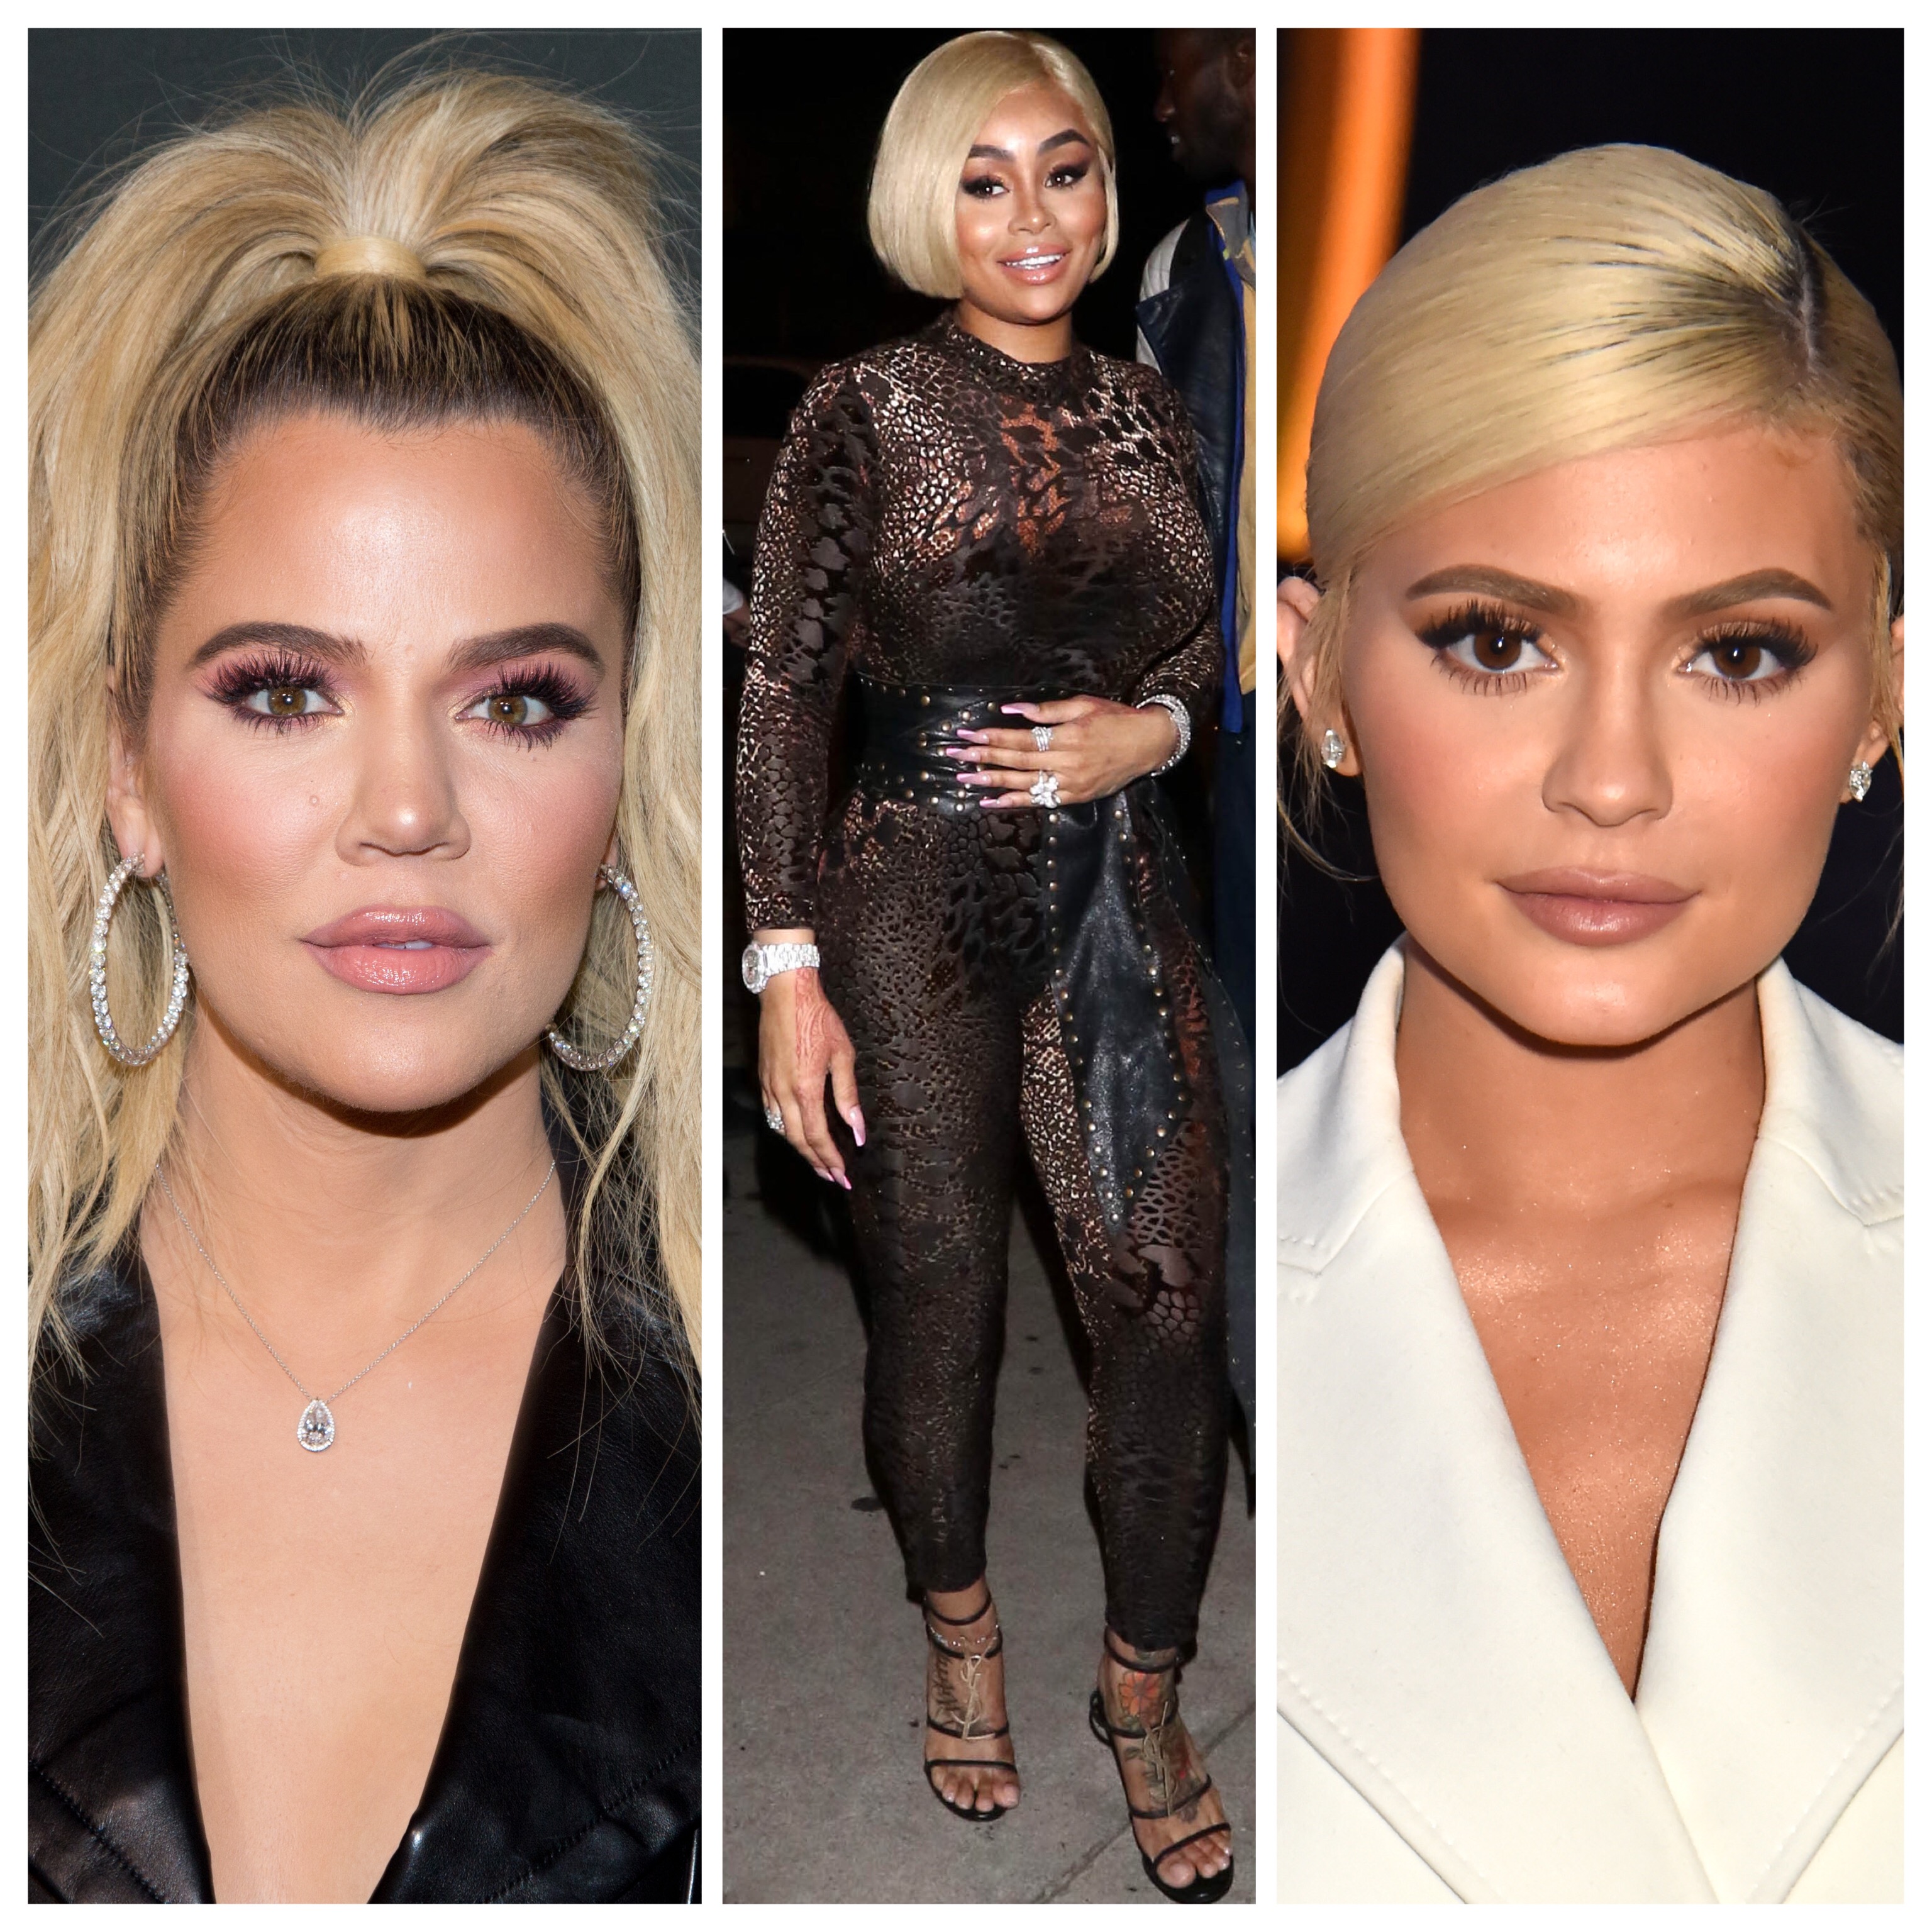 Leaked Emails Show Kylie Jenner And Khloe Kardashian Talked Smack About Blac Chyna ...3072 x 3072